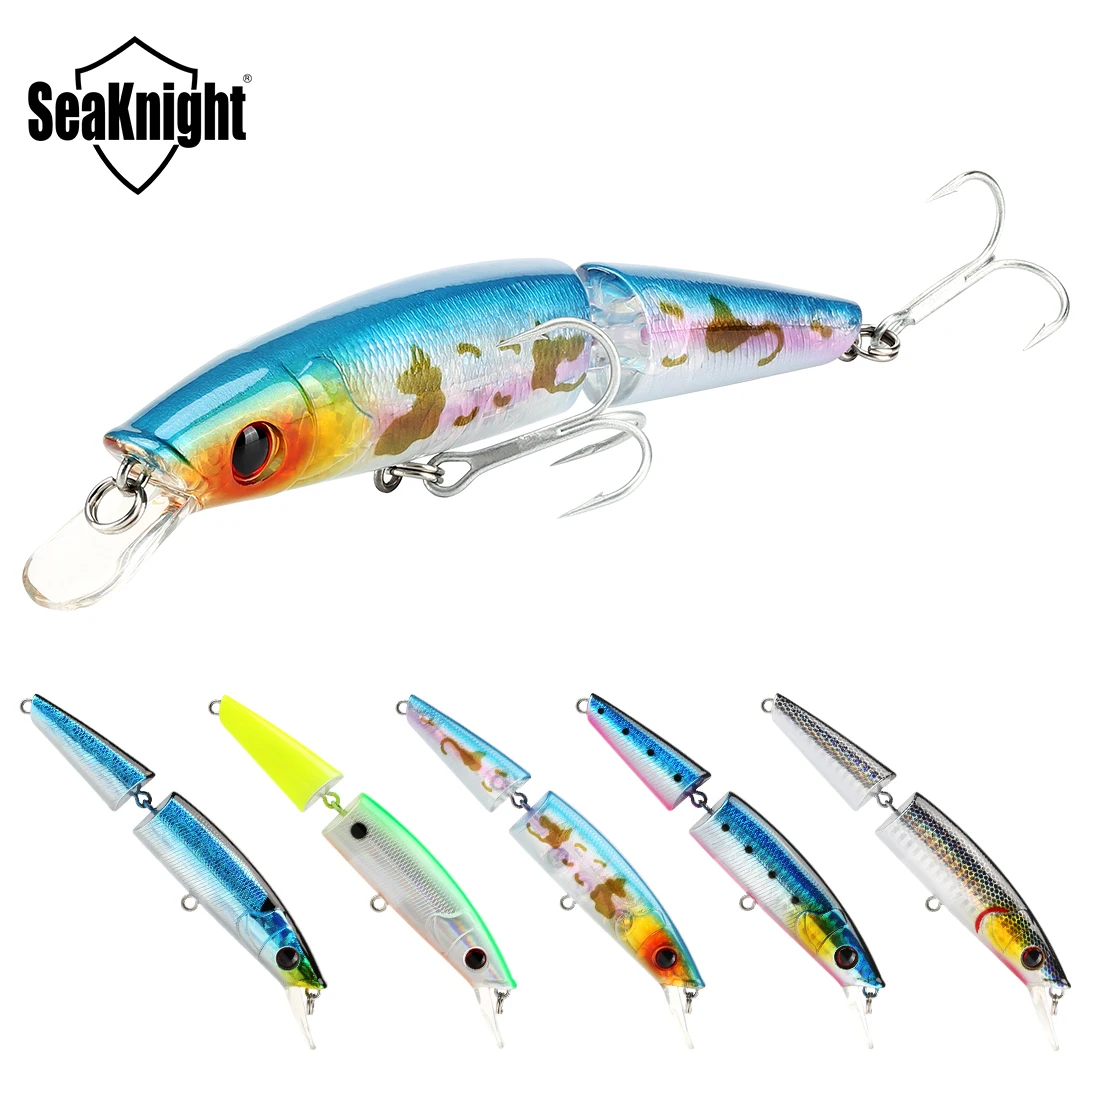 

SeaKnight Minnow SK041 21.5g 125mm 0-1.0M 5PCS Fishing Lure Set 2 Sections Jointed Bait Long Casting Minnow VMC Hook Sea Fishing